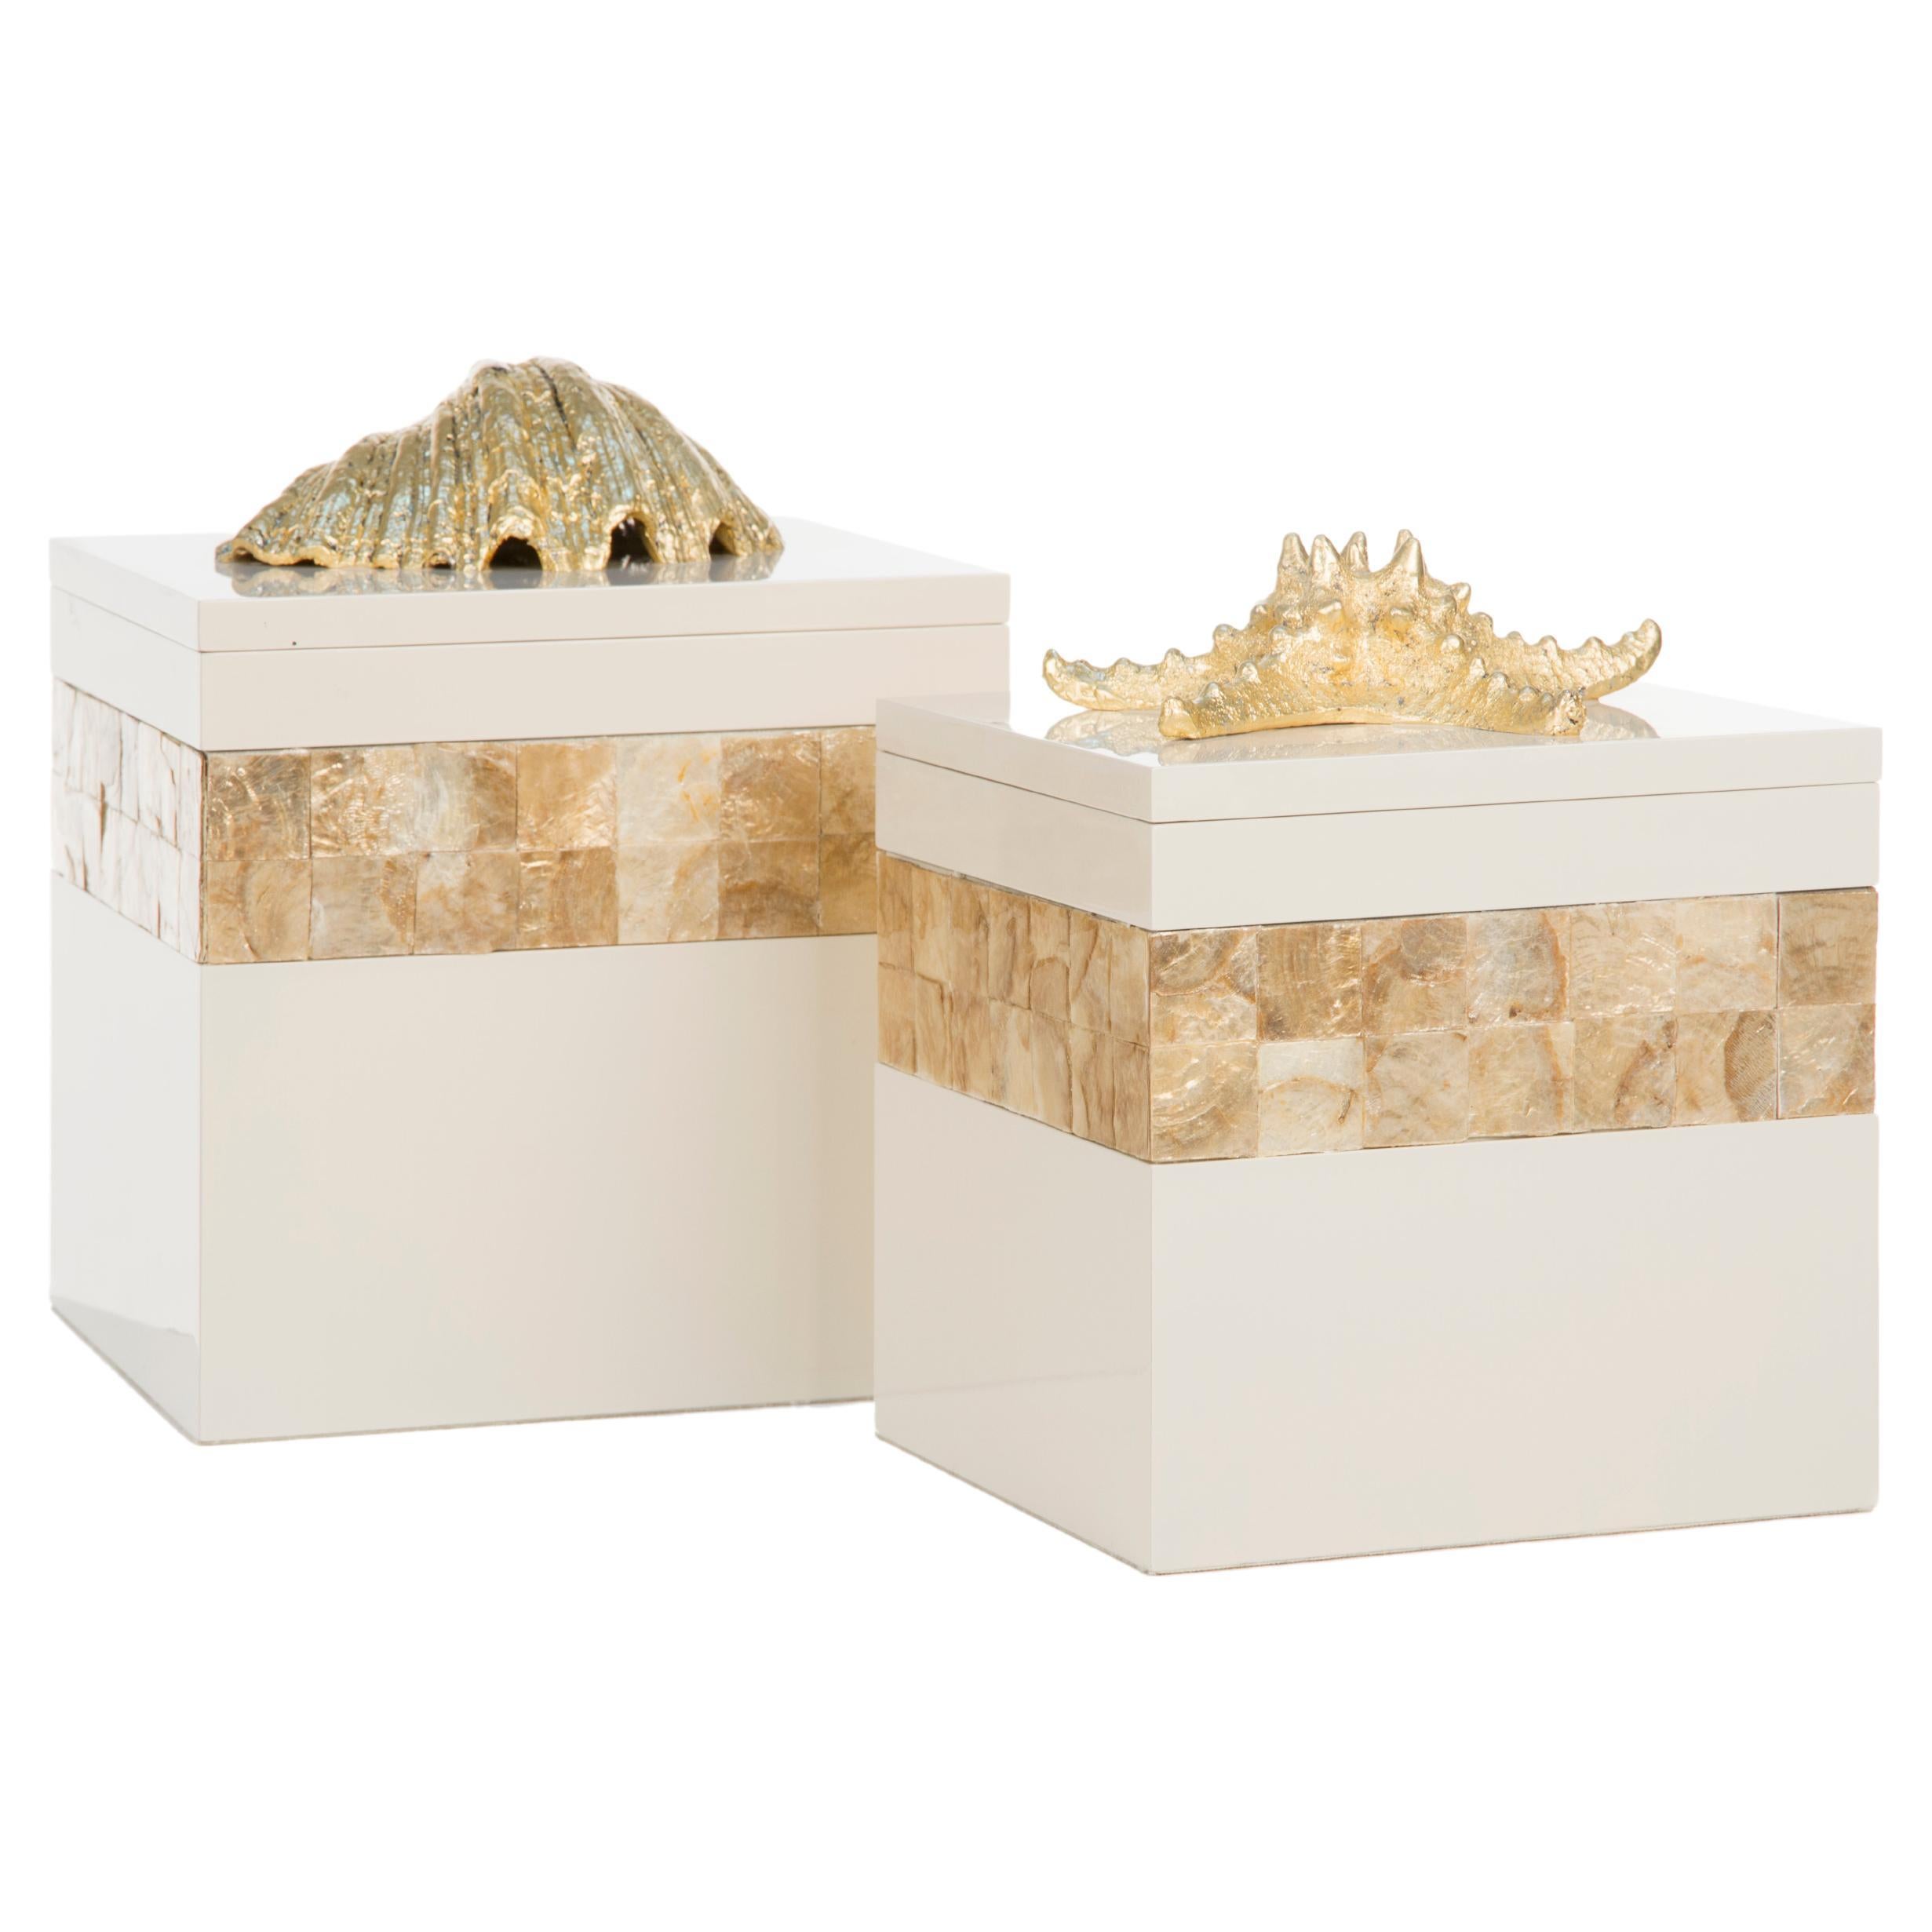 21st Century Modern Set of 2 Boxes Dandara Handcrafted in Portugal by Greenapple